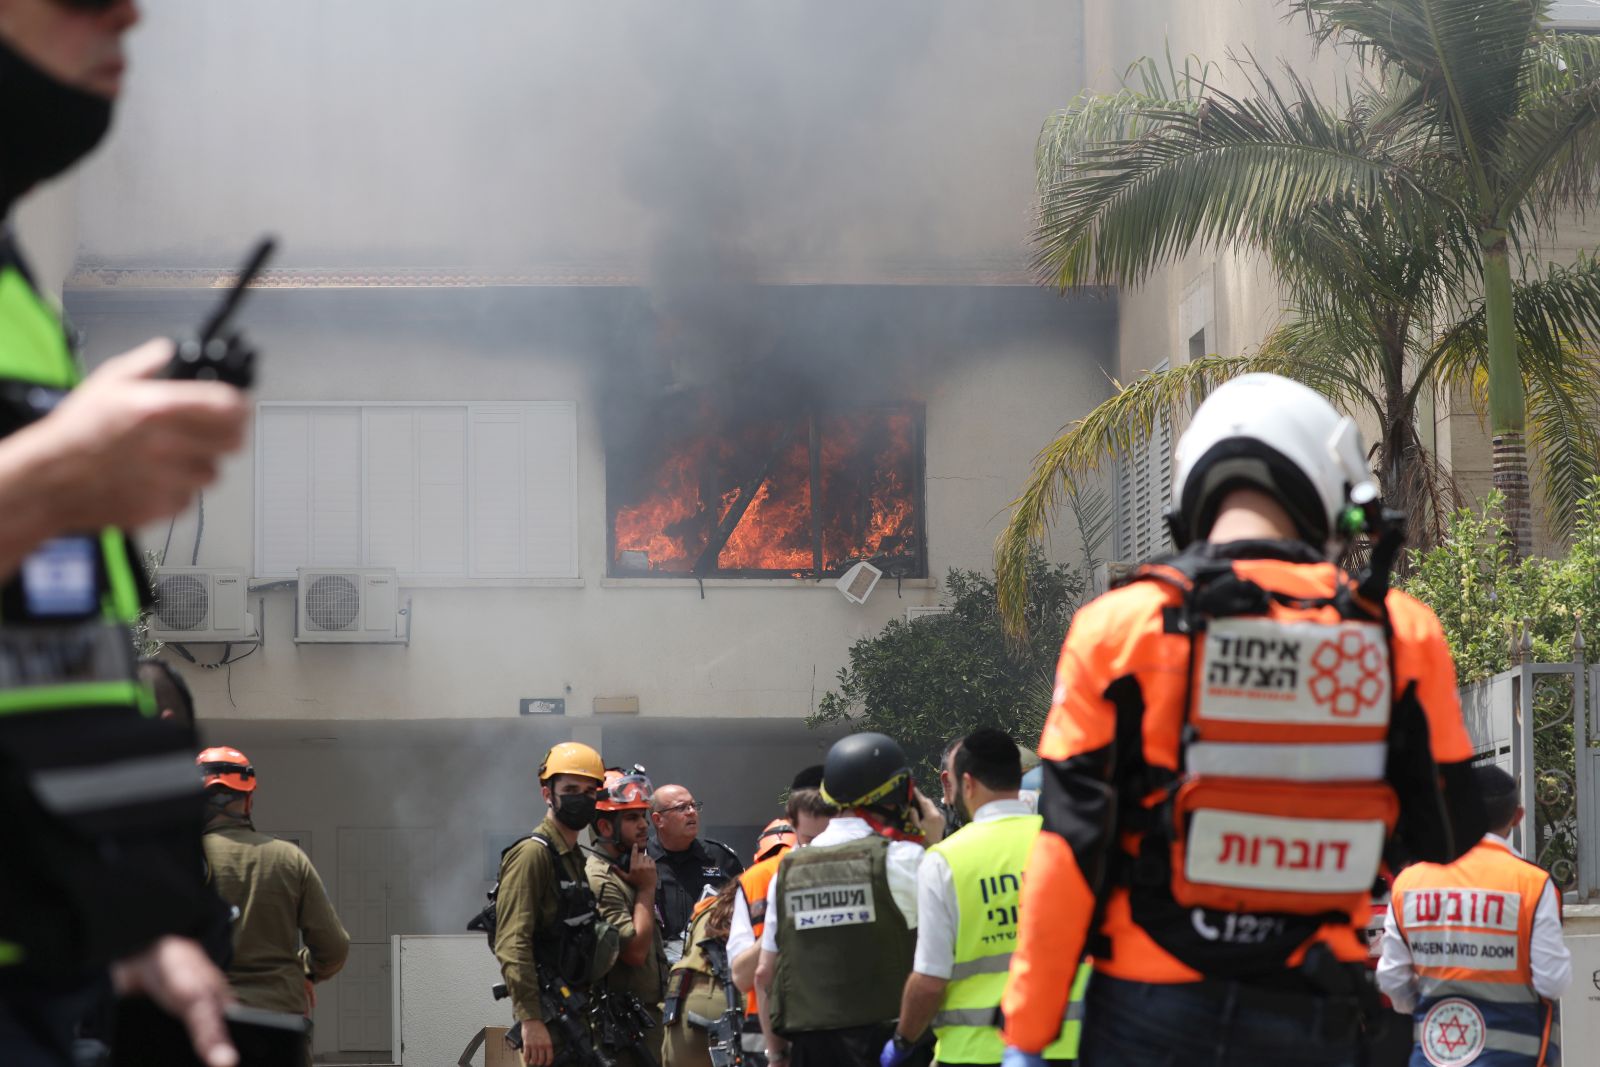 epa09191032 Israeli emergency services on the scene where a rocket fired from the Gaza Strip hit a house in the city of Ashdod, Israel, 11 May 2021. Israel Defense Forces (IDF) said they hit over 100 Hamas targets in the Gaza Strip during a retaliatory overnight strike after rockets were fired at Israel by Palestinian militants.  EPA/ABIR SULTAN